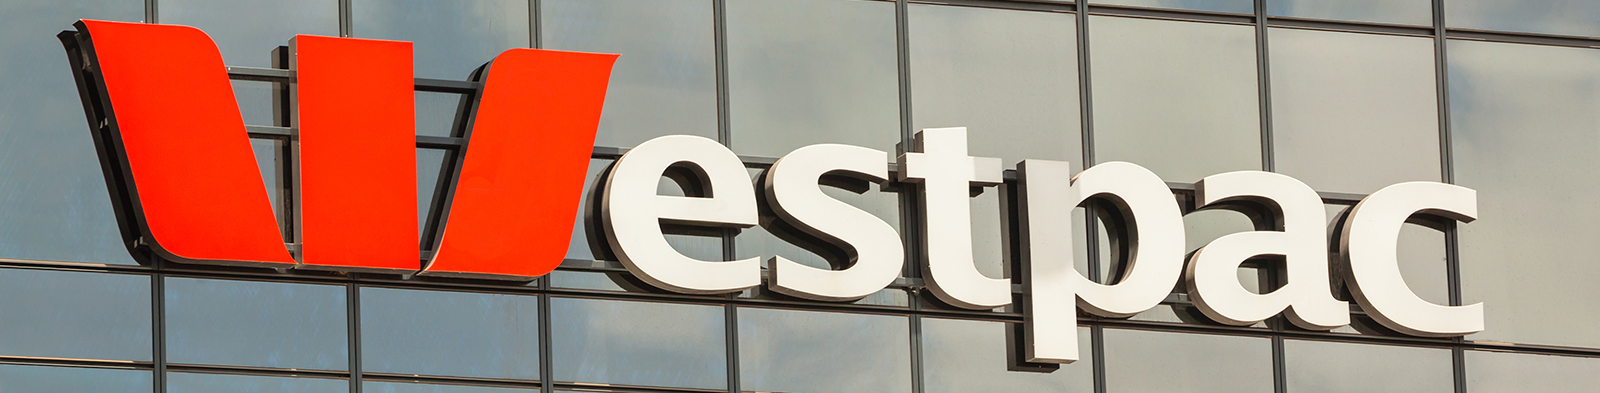 Westpac logo outside of building